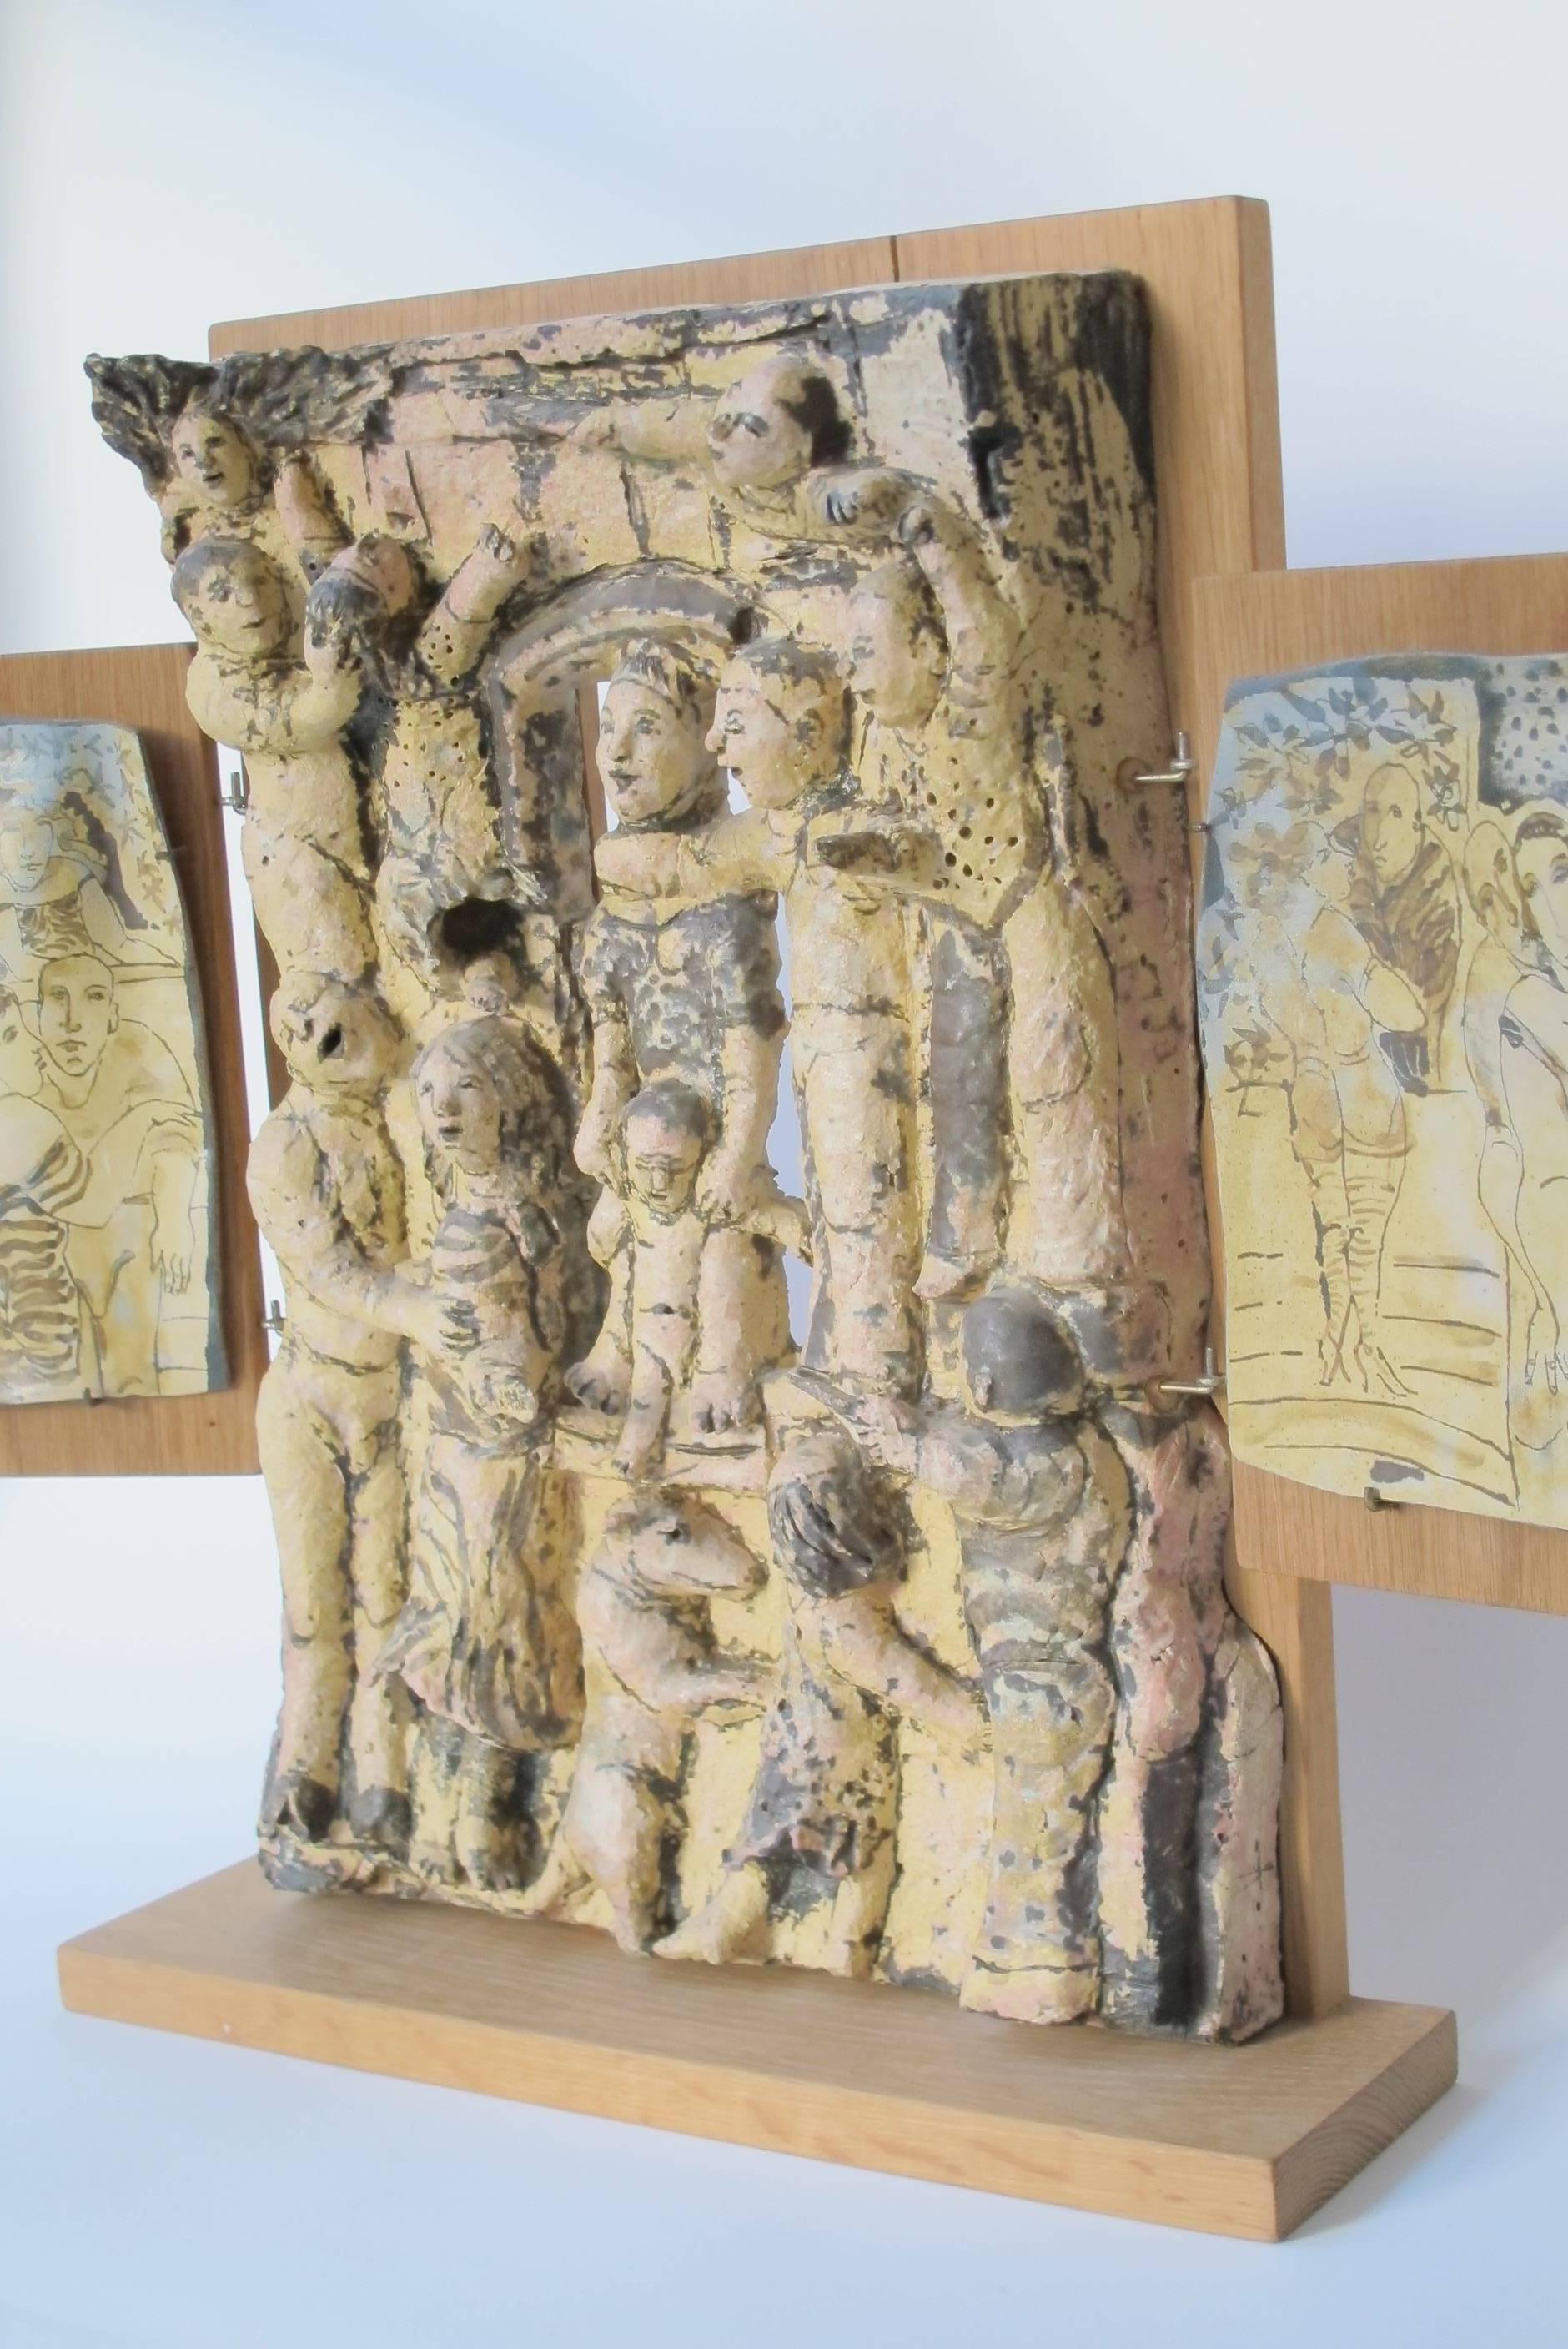 This unique stoneware triptych sculpture was made by Dutch ceramist Lies Cosijn in 1997. The triptych is hand-painted and shows us three different scenes. The largest part in the middle, displays a number of figures surrounding a mother figure with